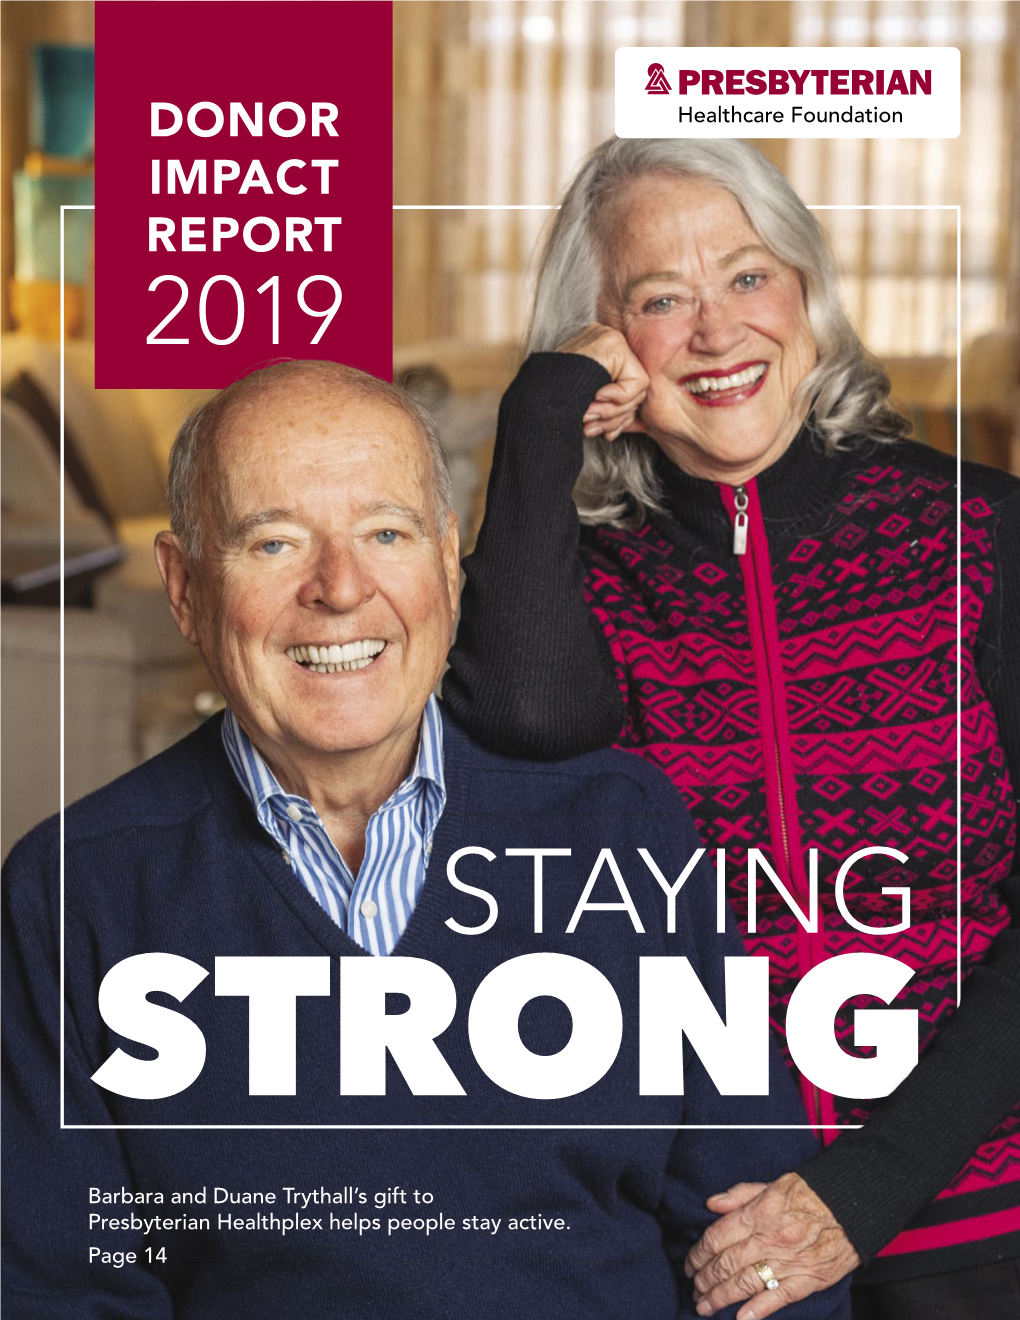 Donor Impact Report 2019